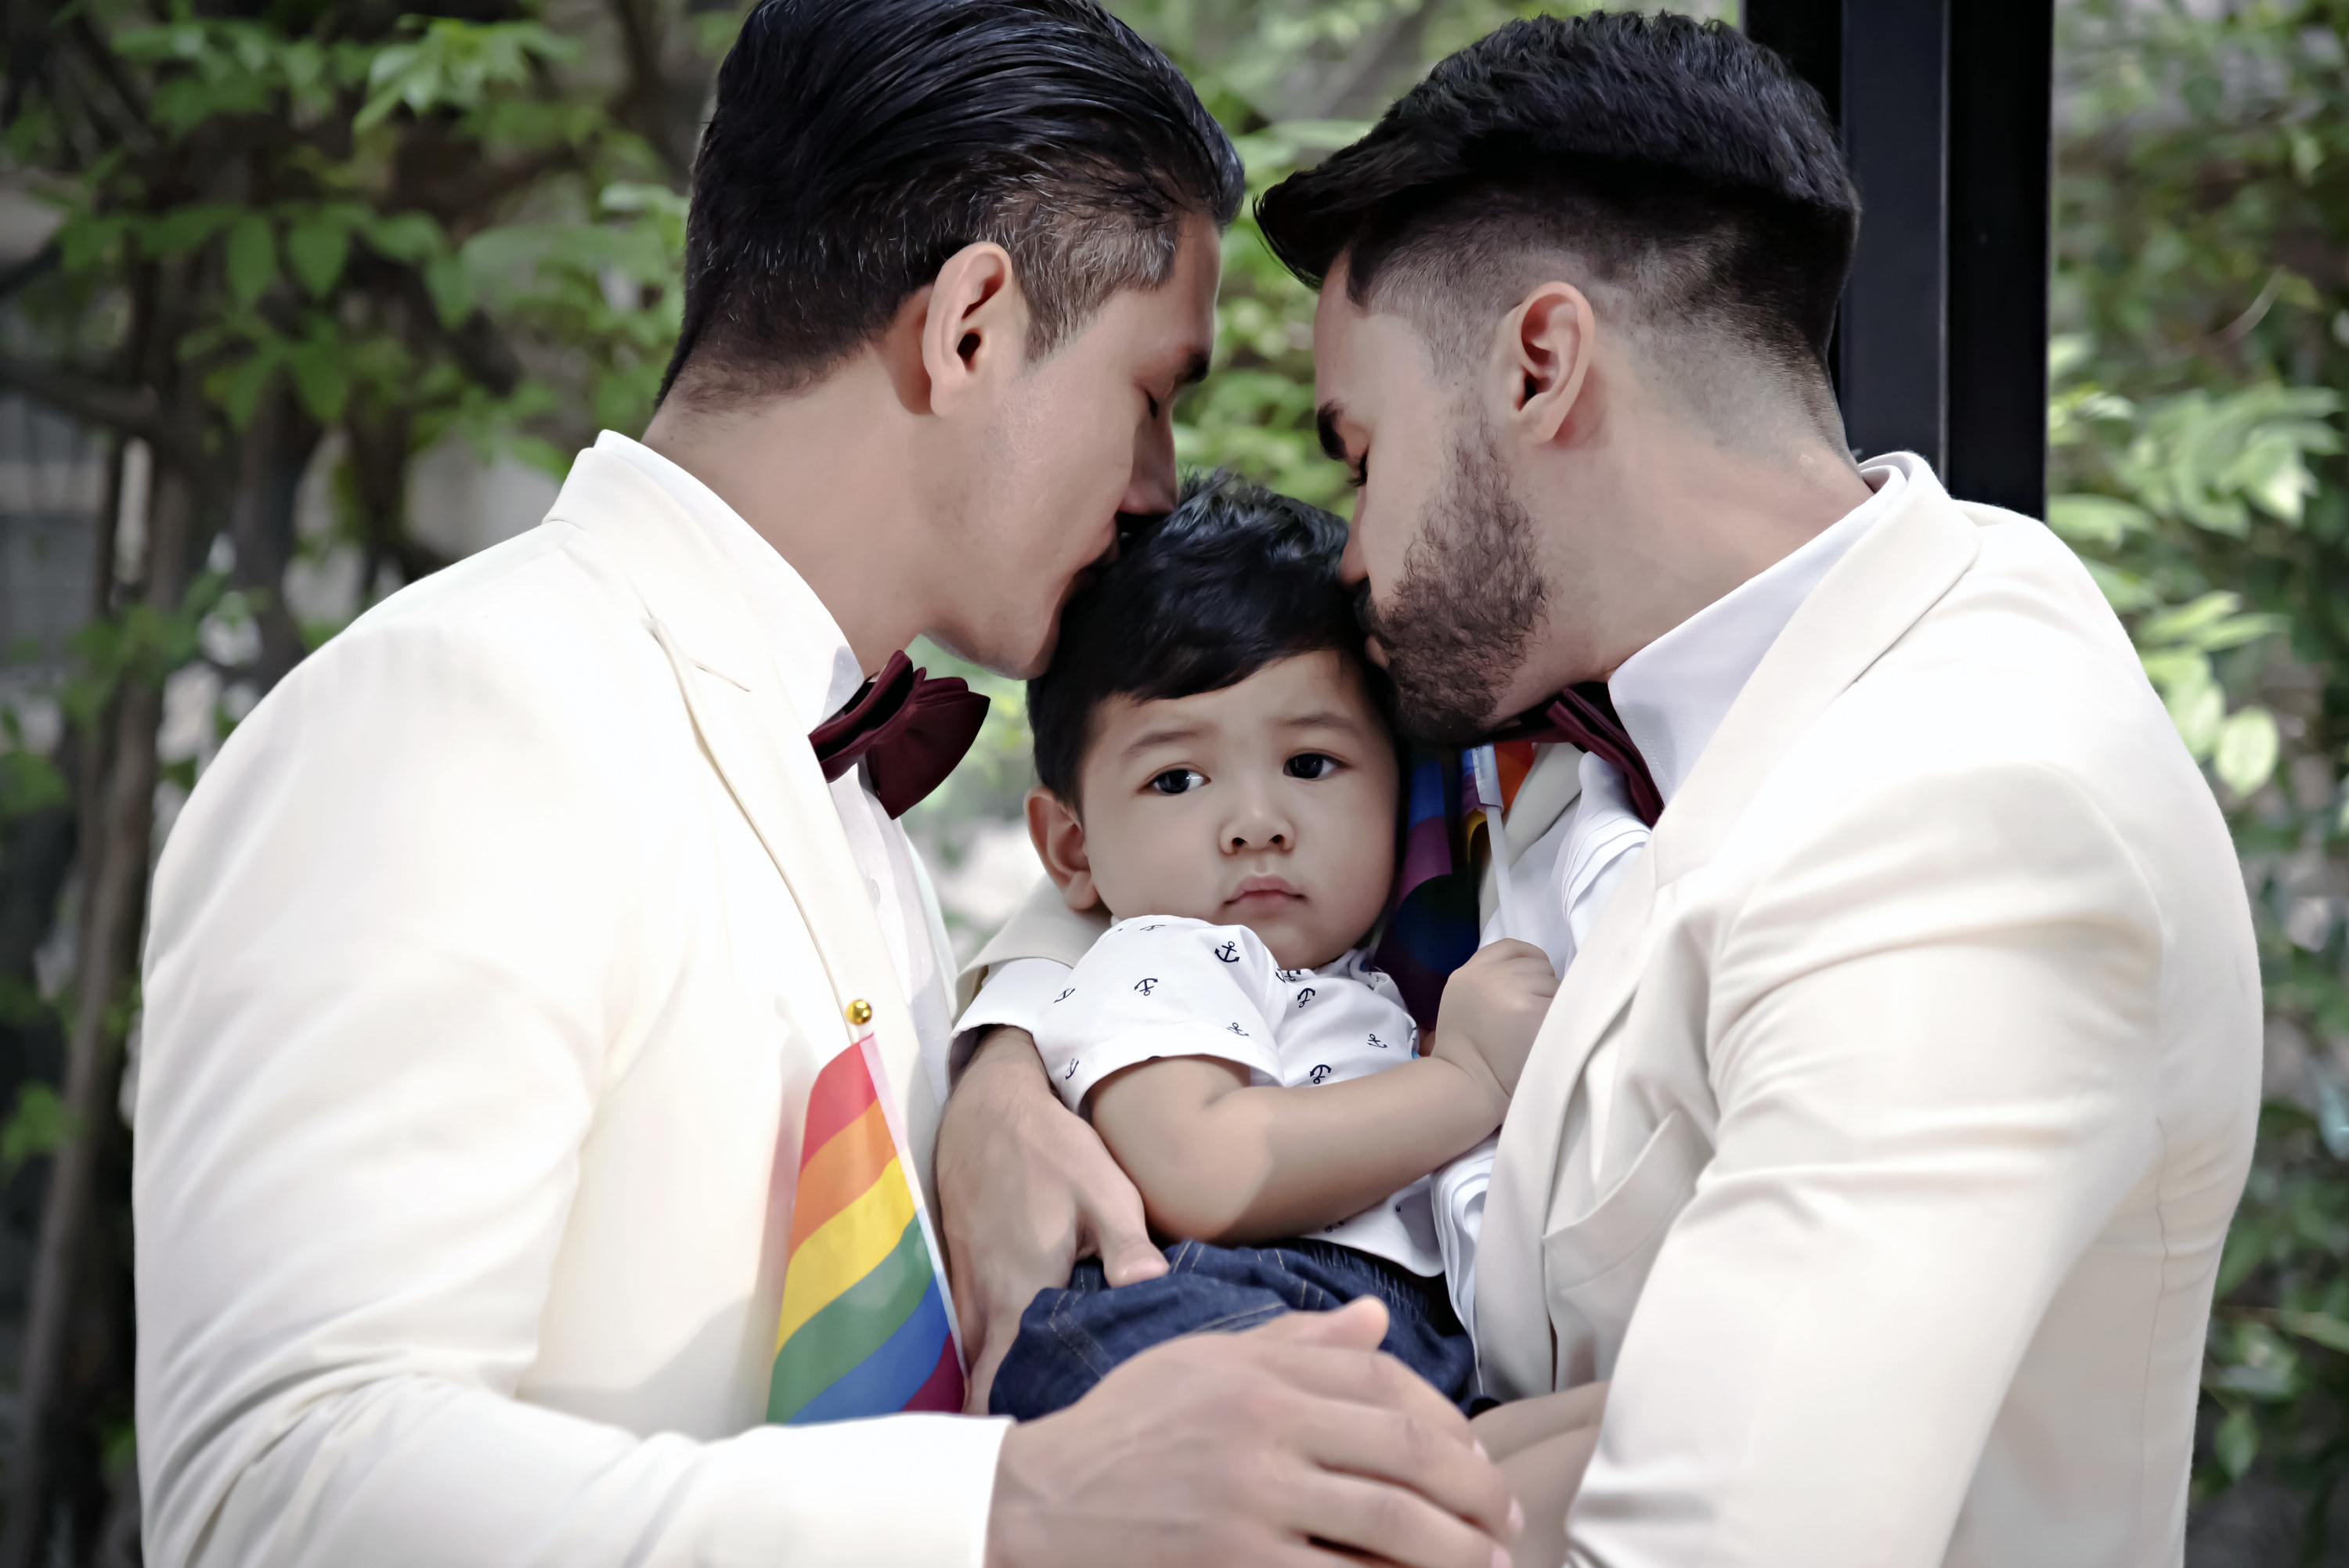 Two men kiss their baby